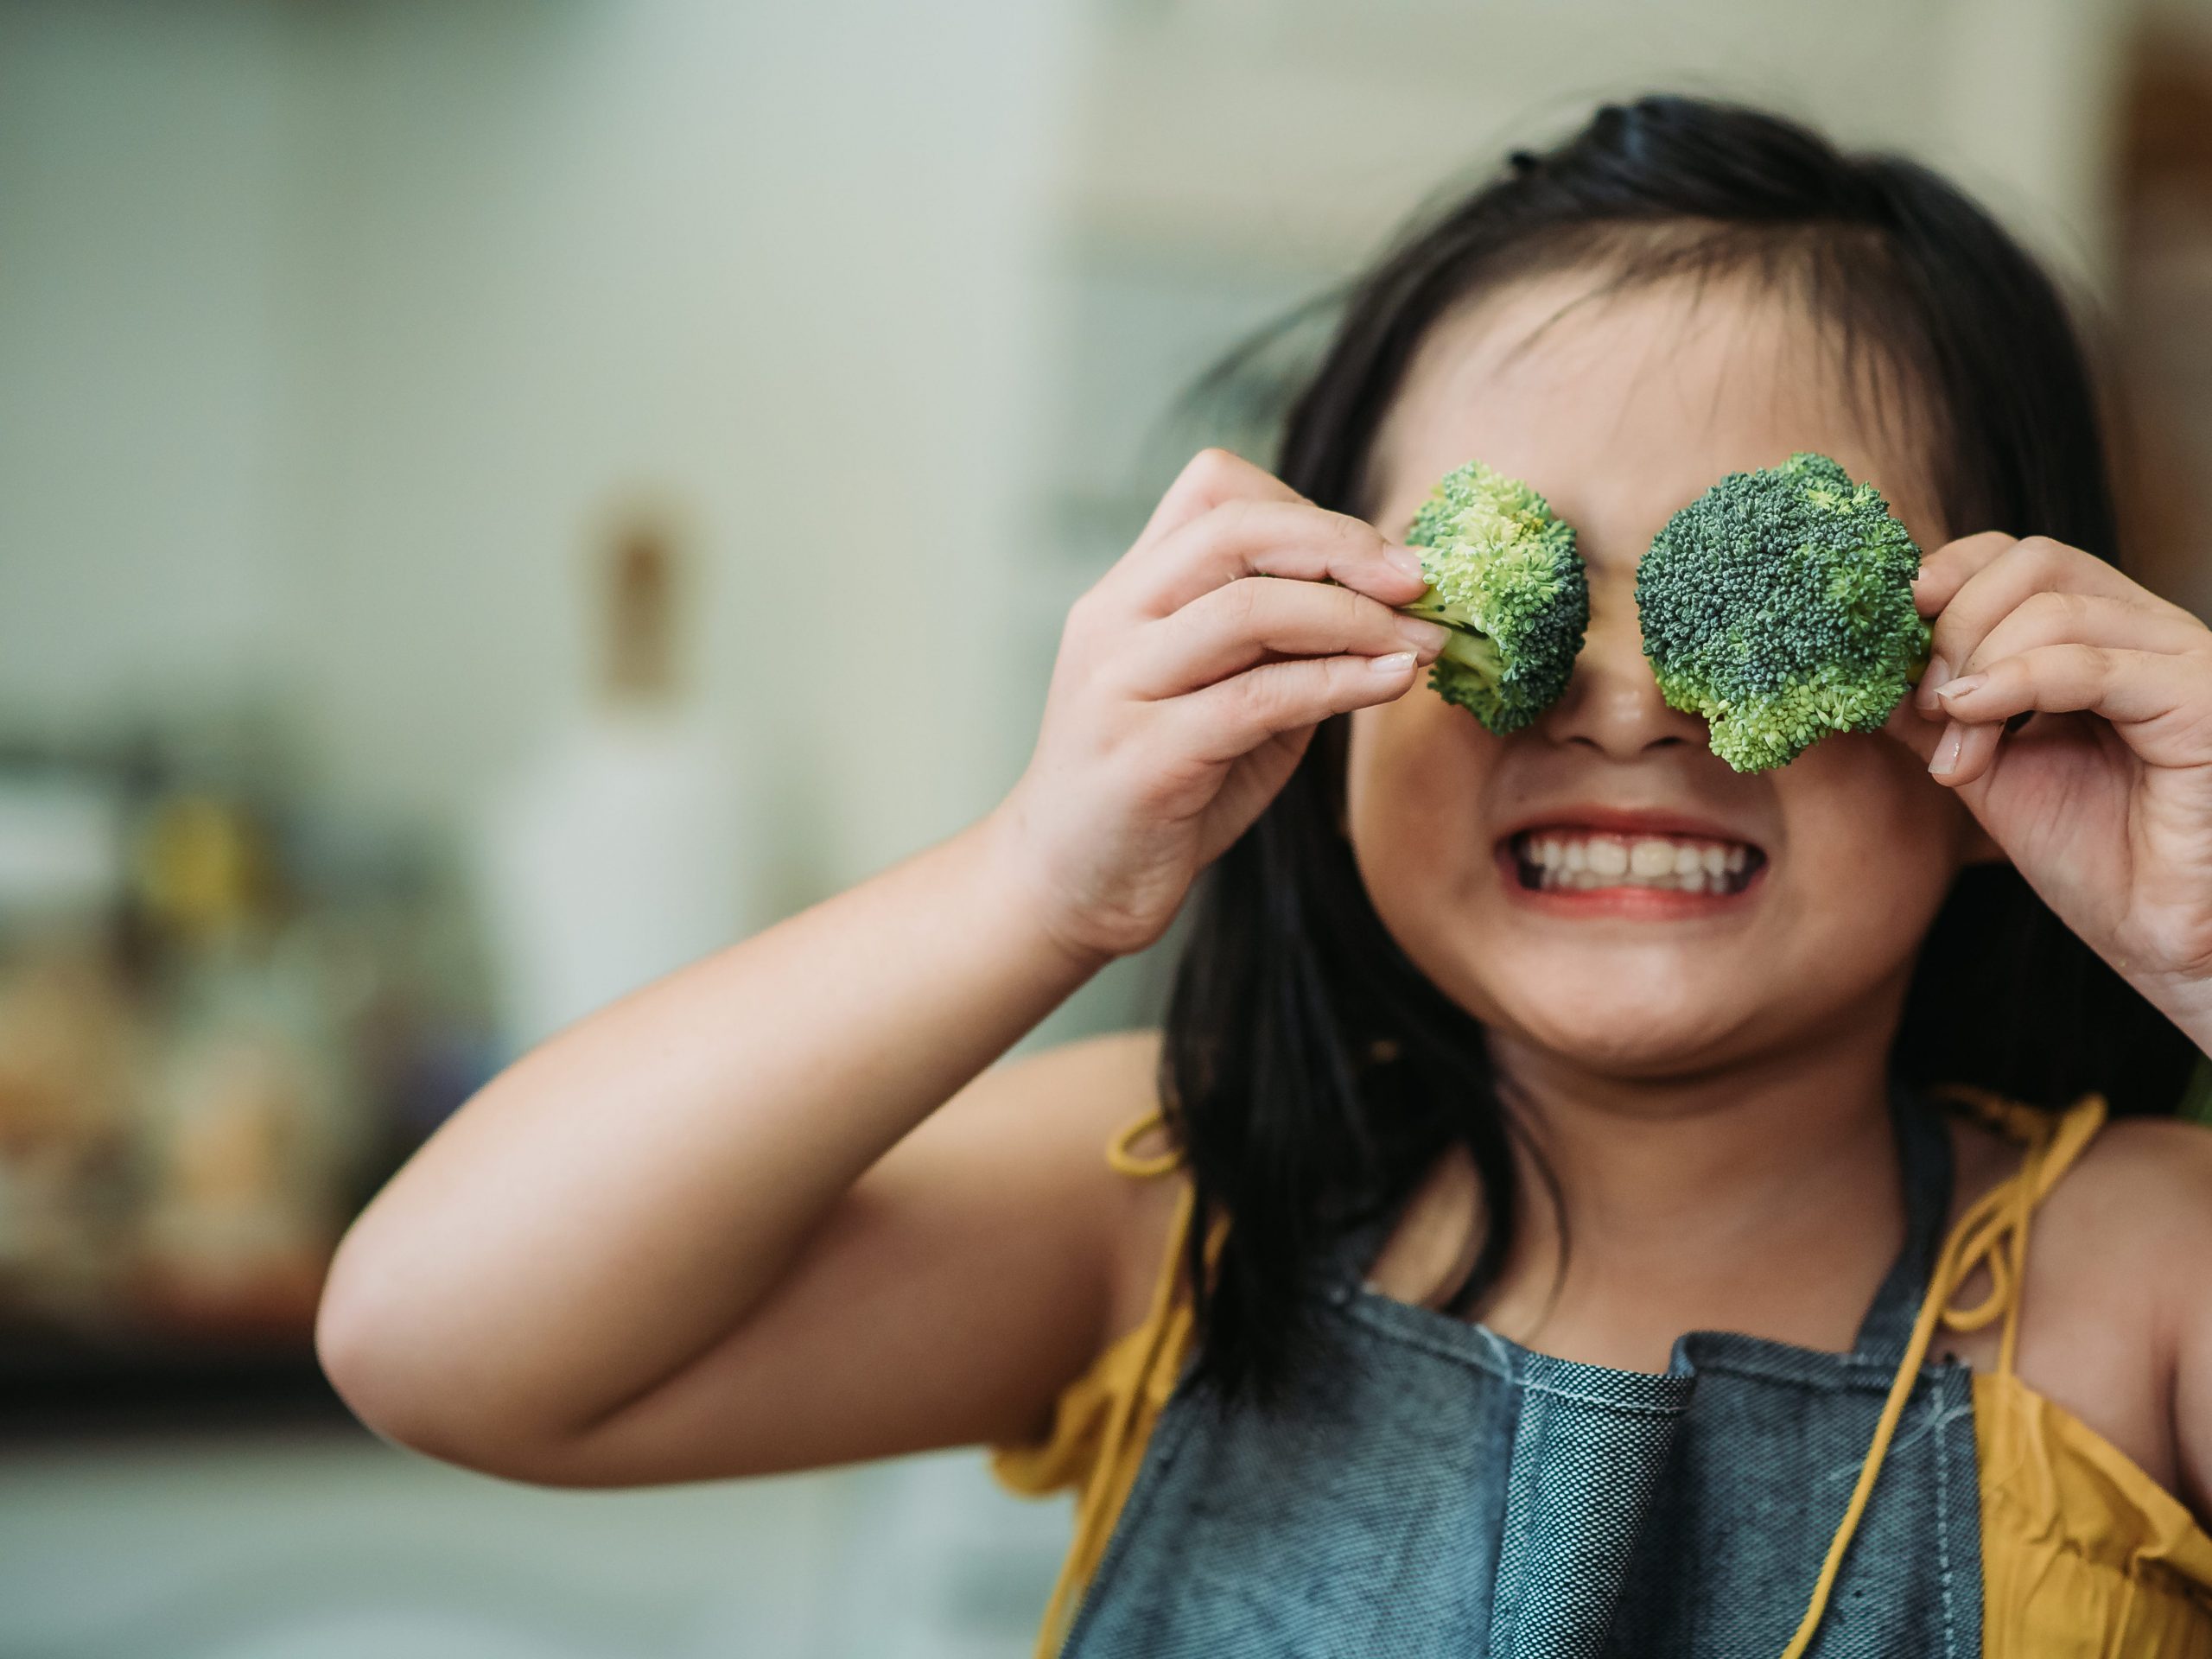 child act cute with hand holding broccoli putting in front of her eyes with smiling face at kitchen